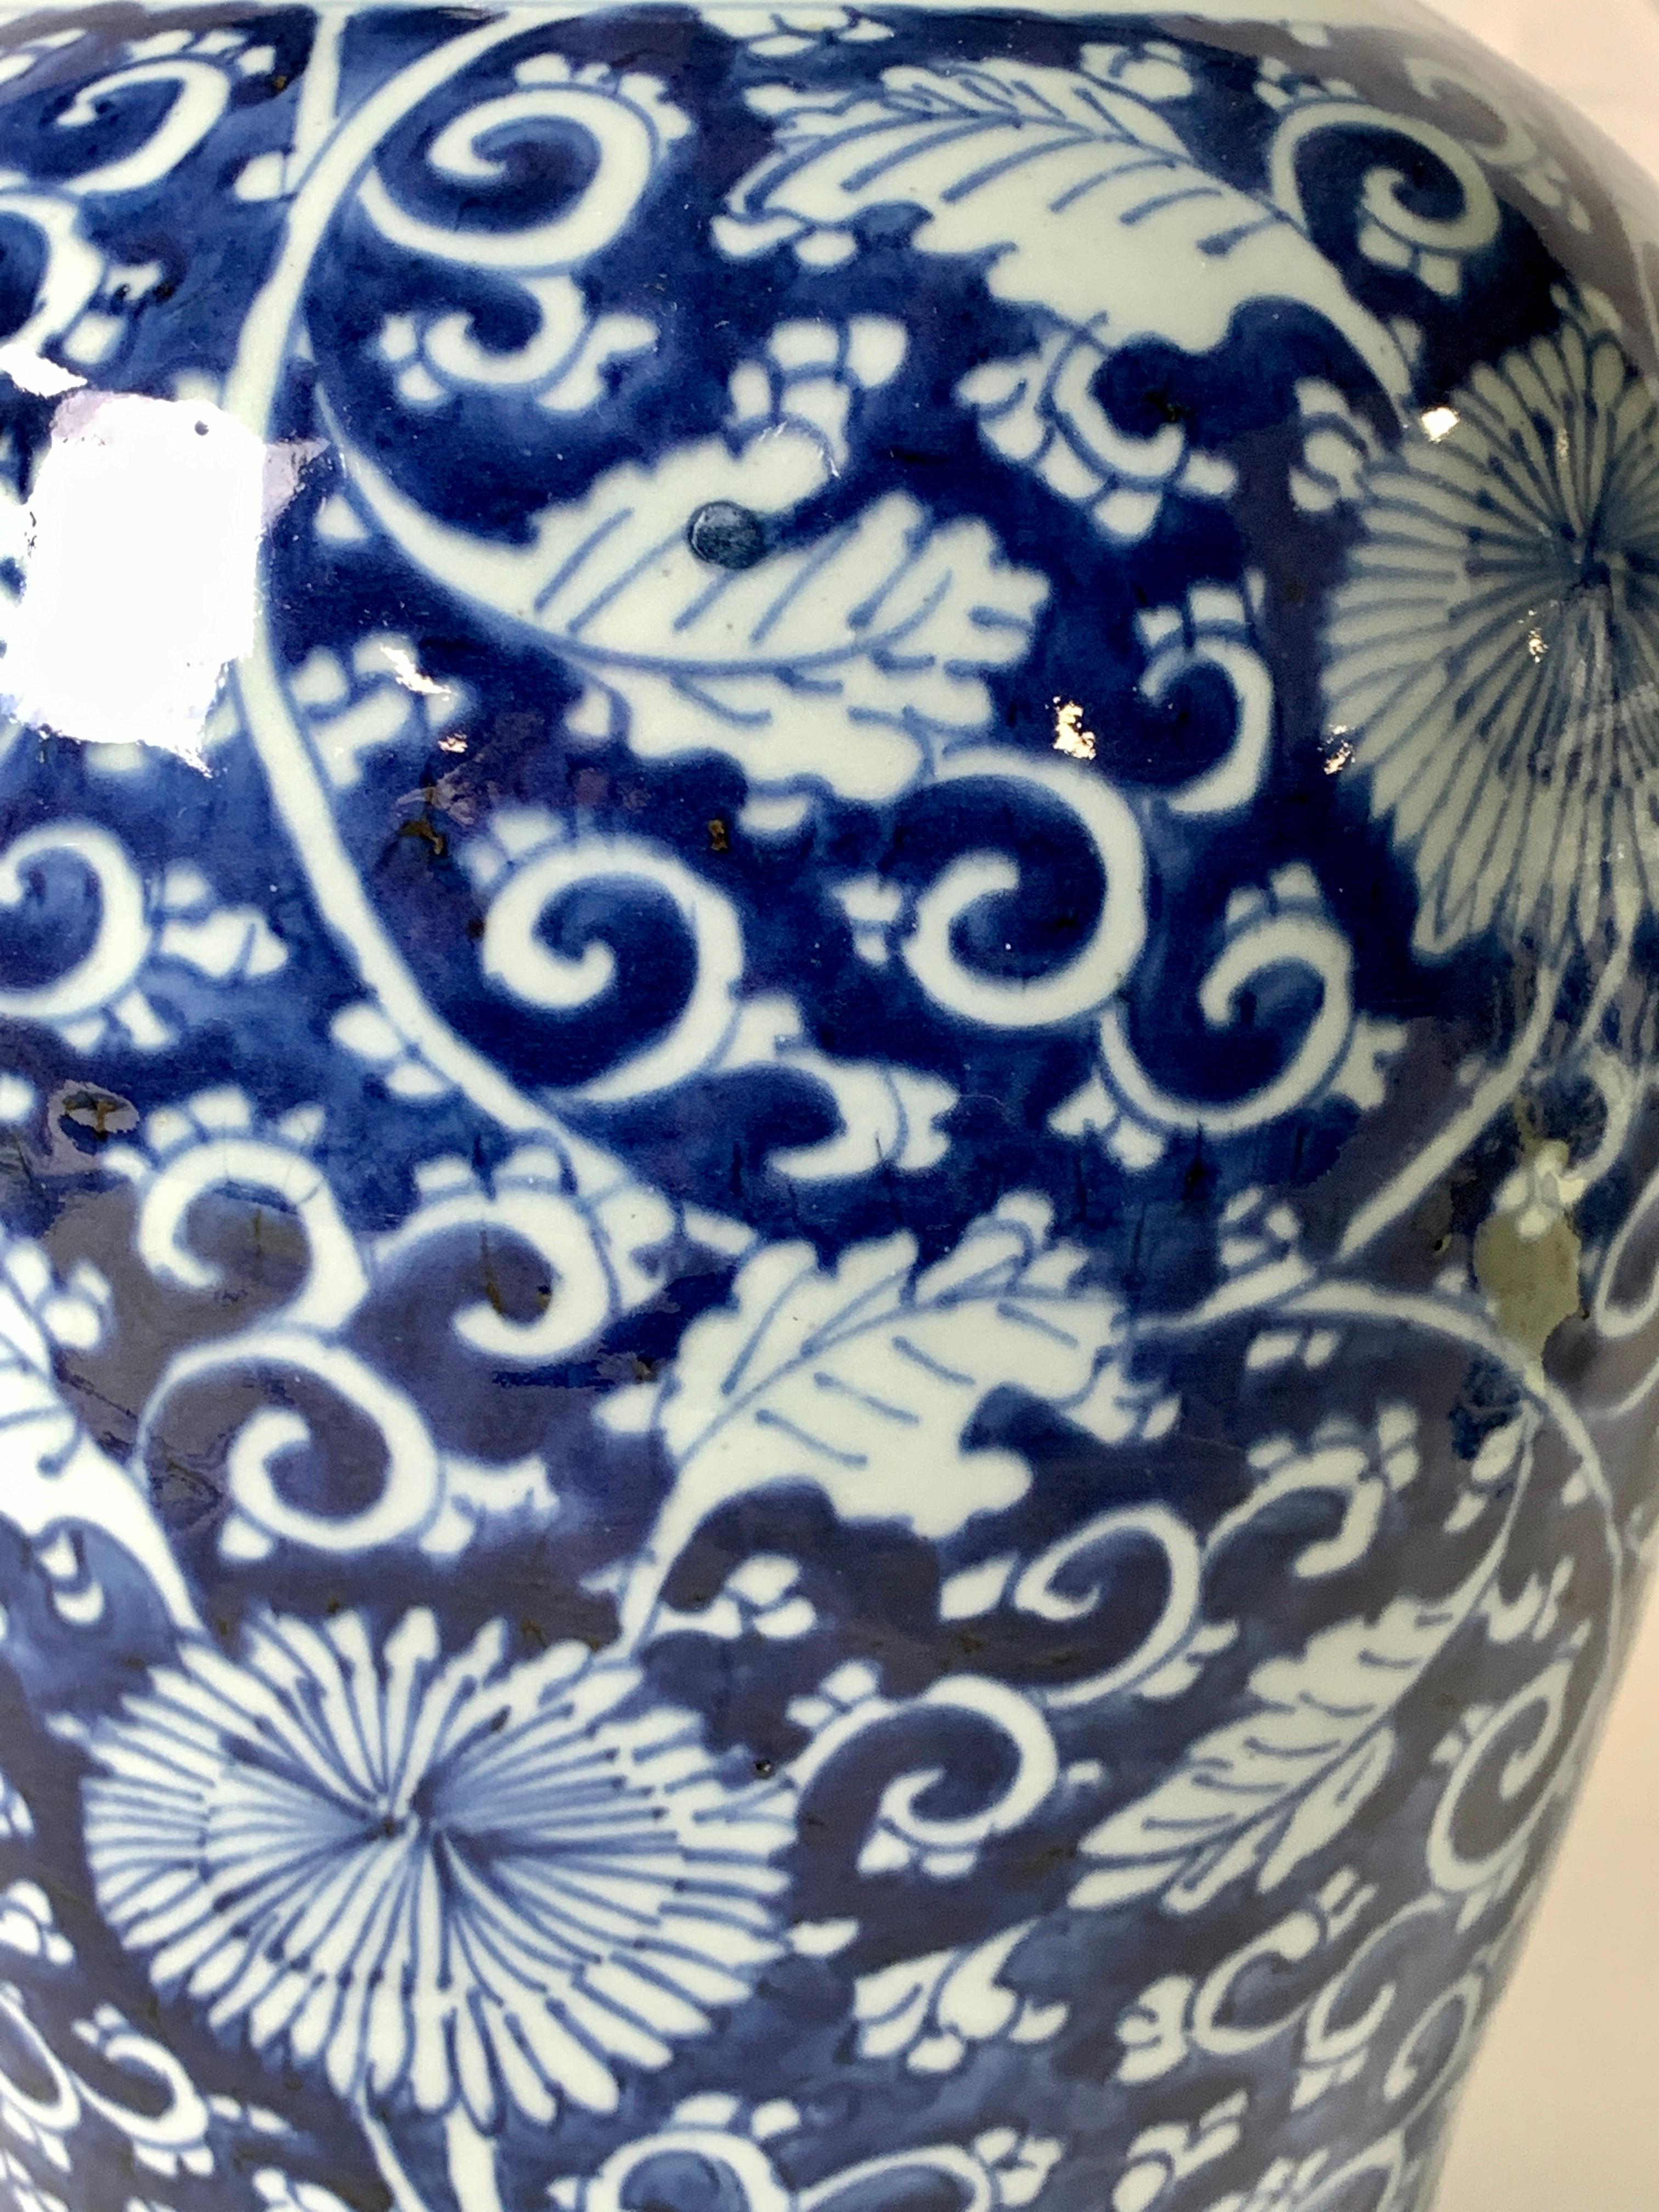 Hand-Painted Blue and White Chinese Porcelain Vase Made in the Kangxi Era